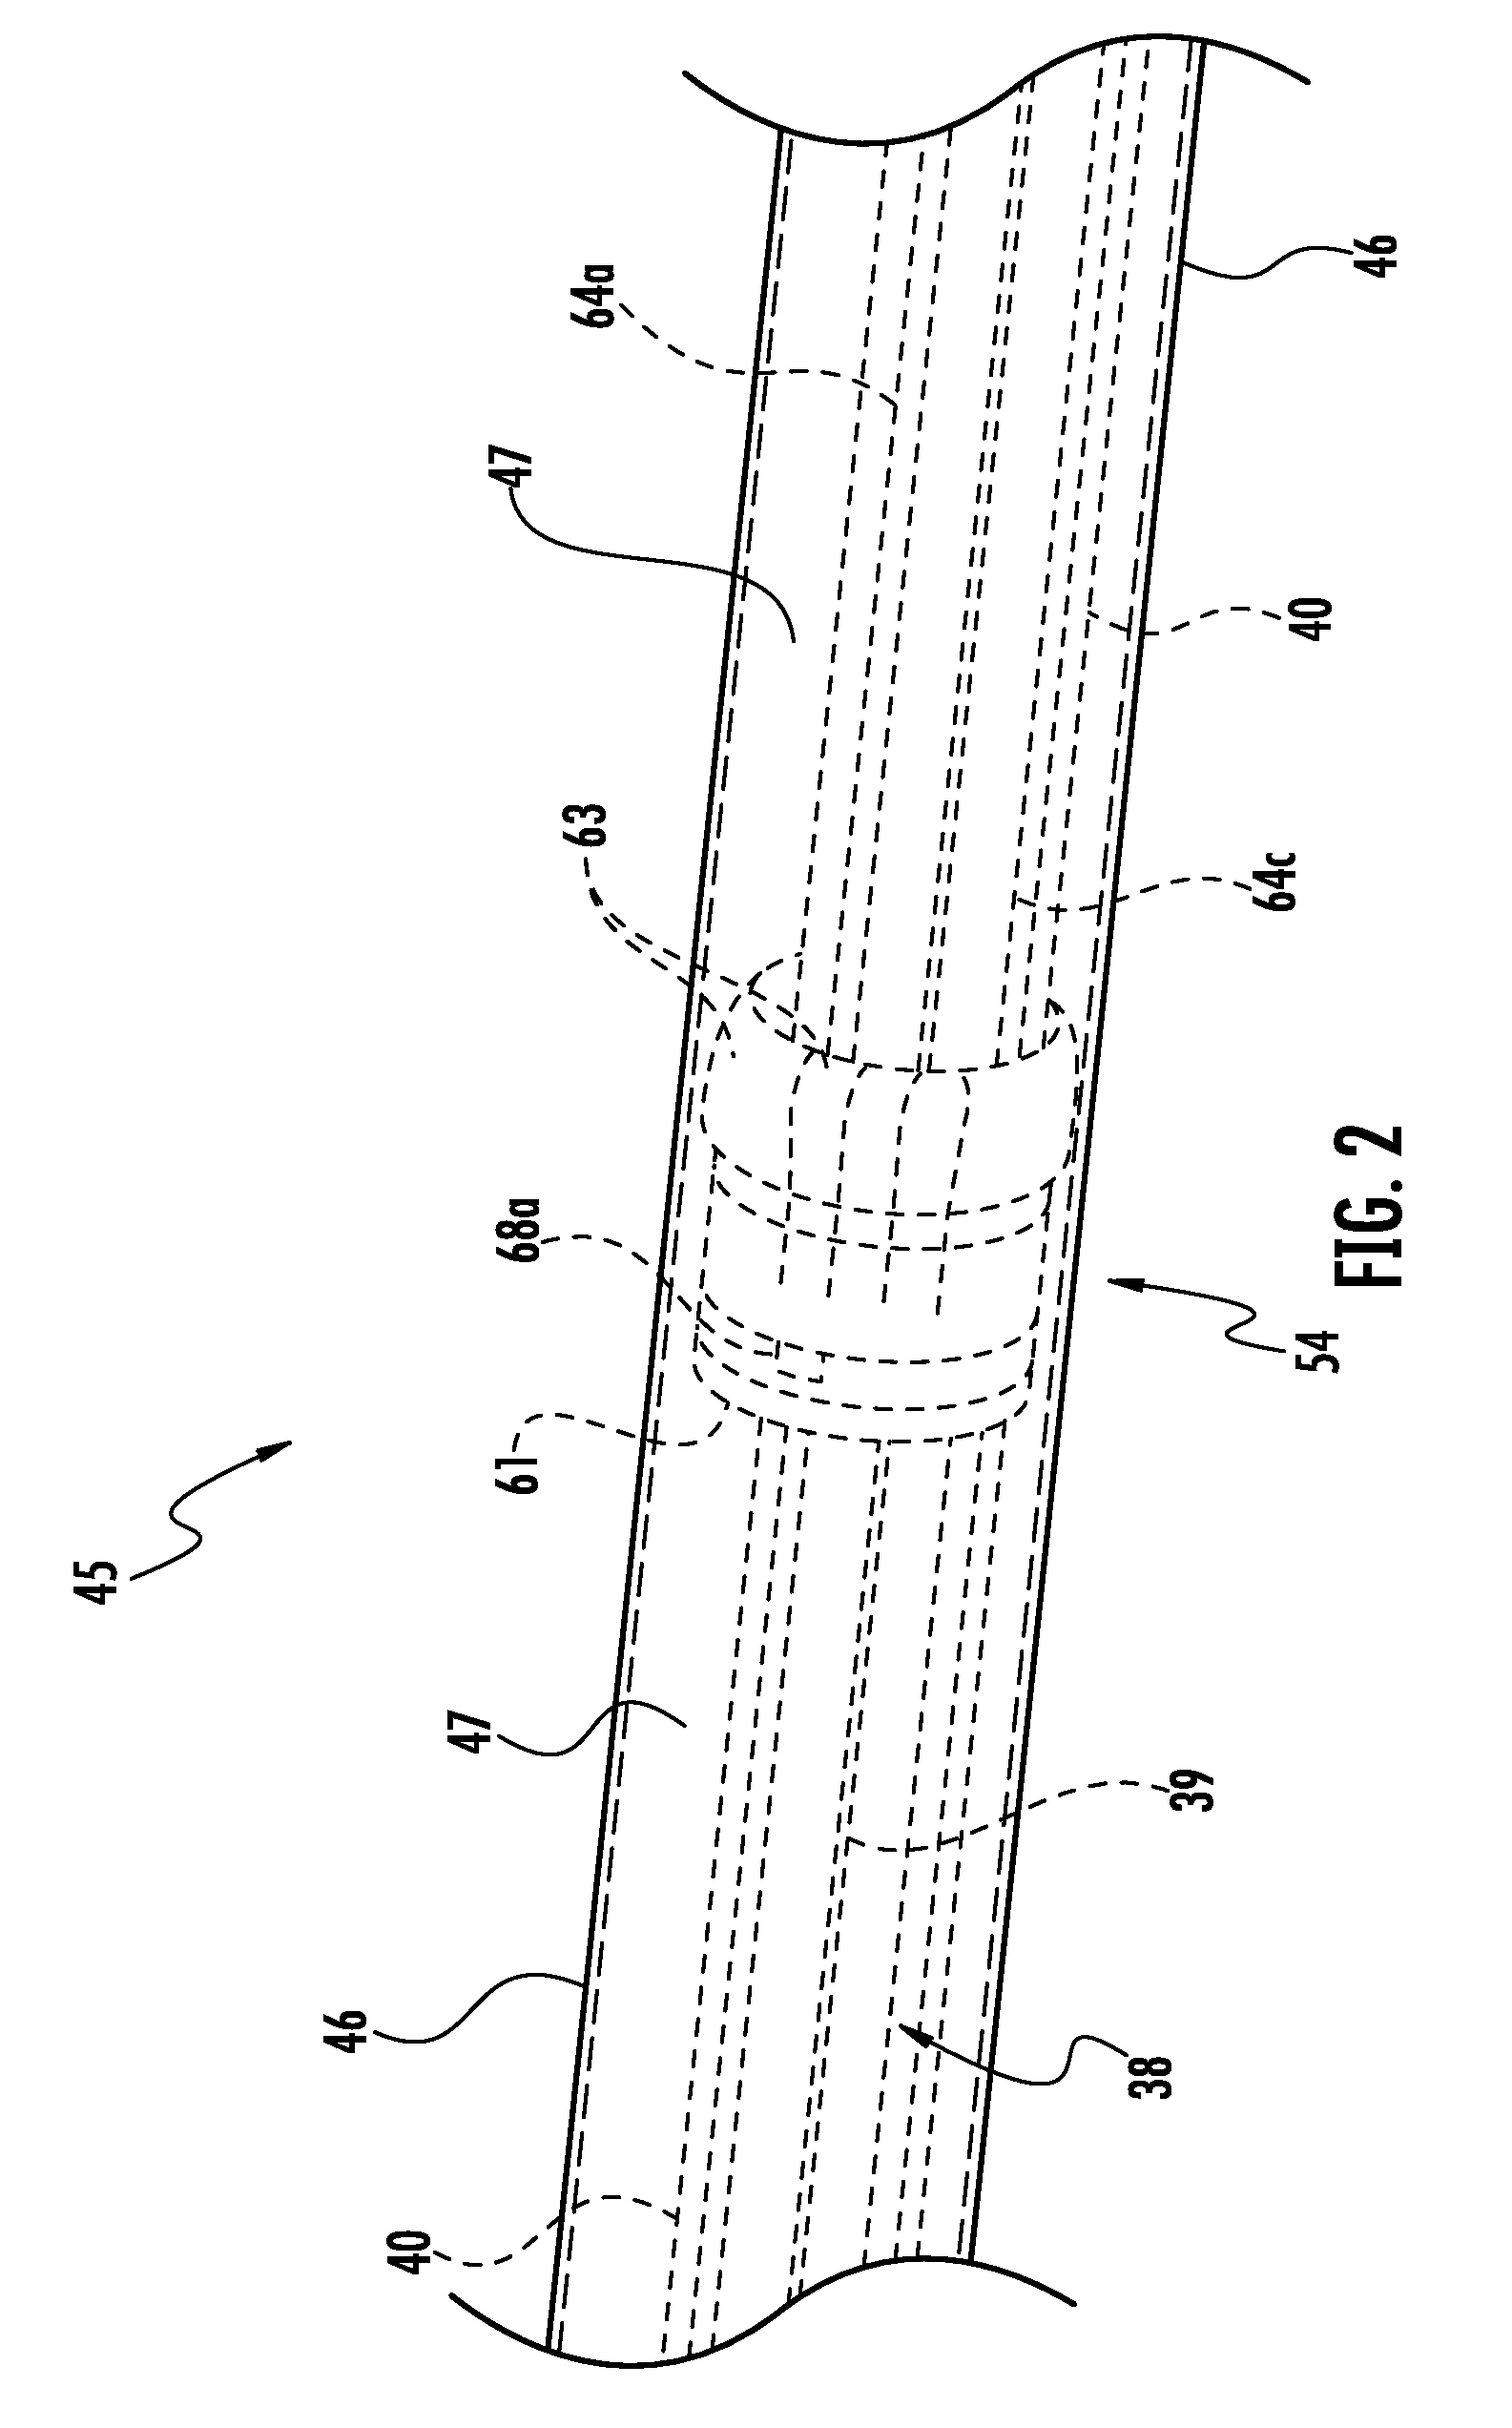 Radio frequency antenna assembly for hydrocarbon resource recovery including adjustable shorting plug and related methods